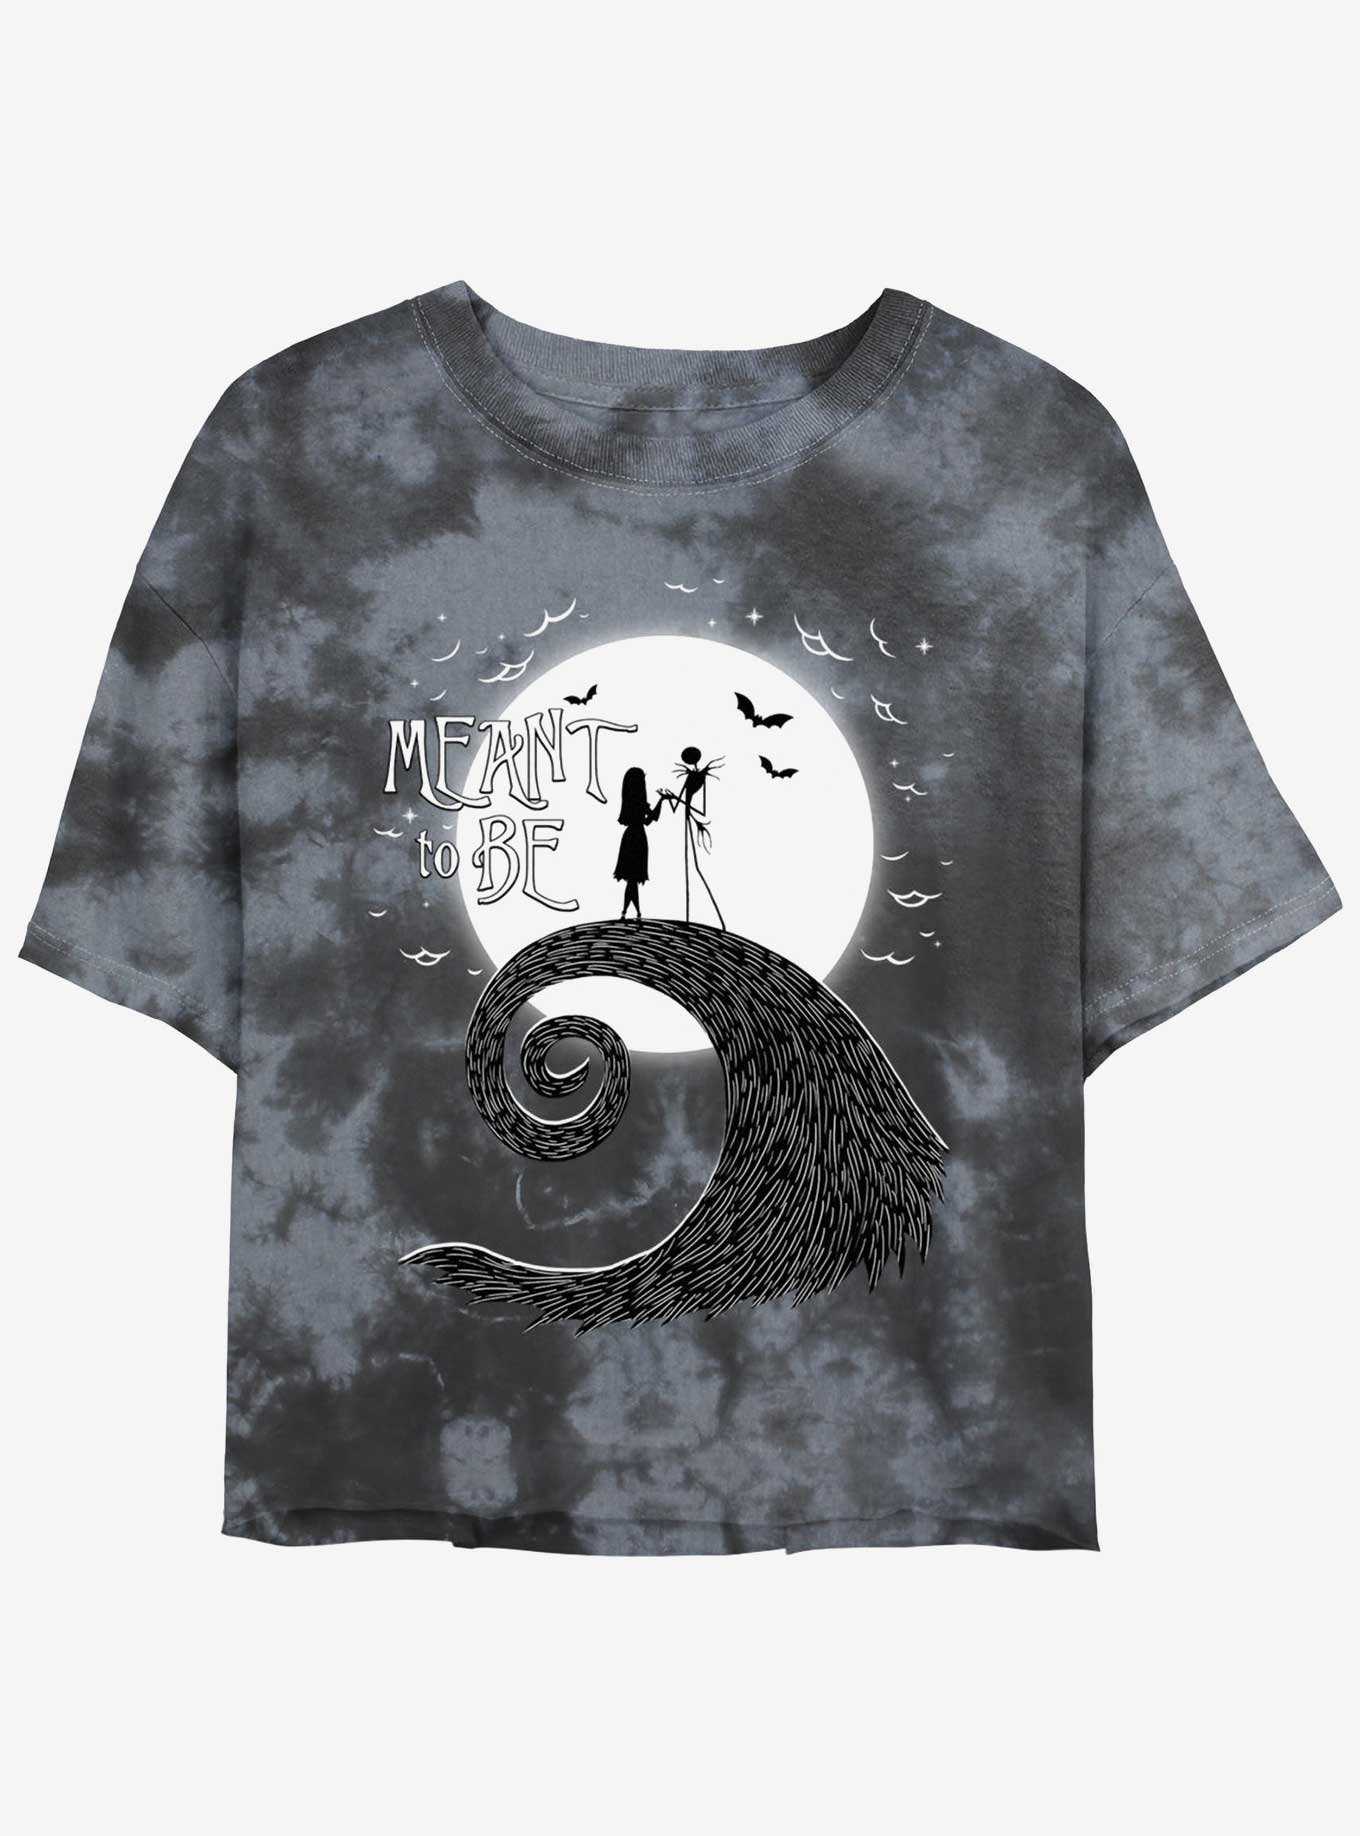 Disney The Nightmare Before Christmas Jack and Sally Meant To Be Tie-Dye Womens Crop T-Shirt, , hi-res